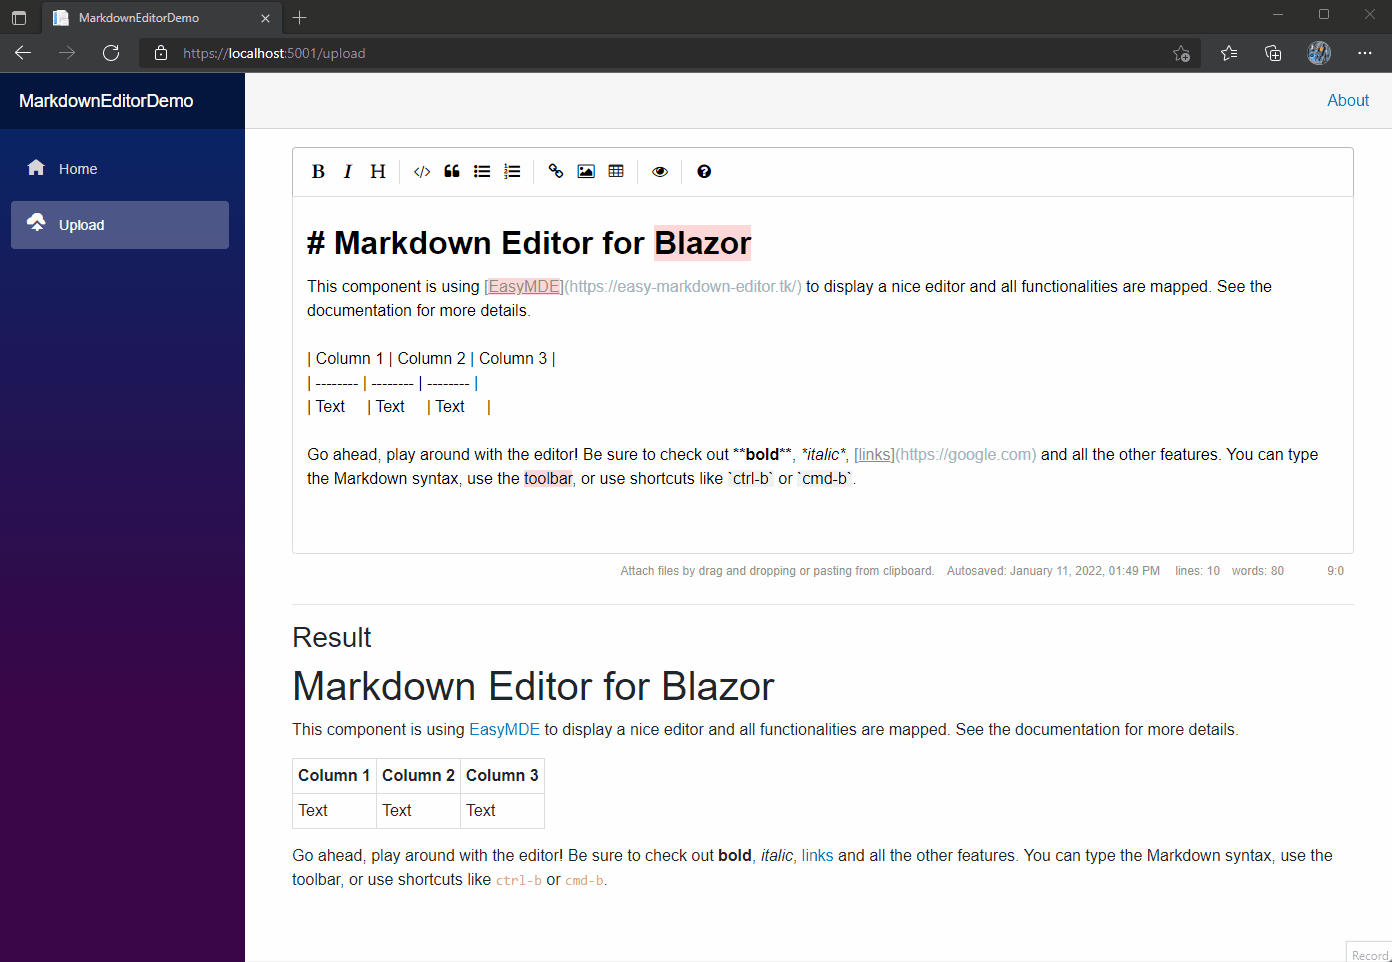 Markdown Editor component for Blazor Upload example